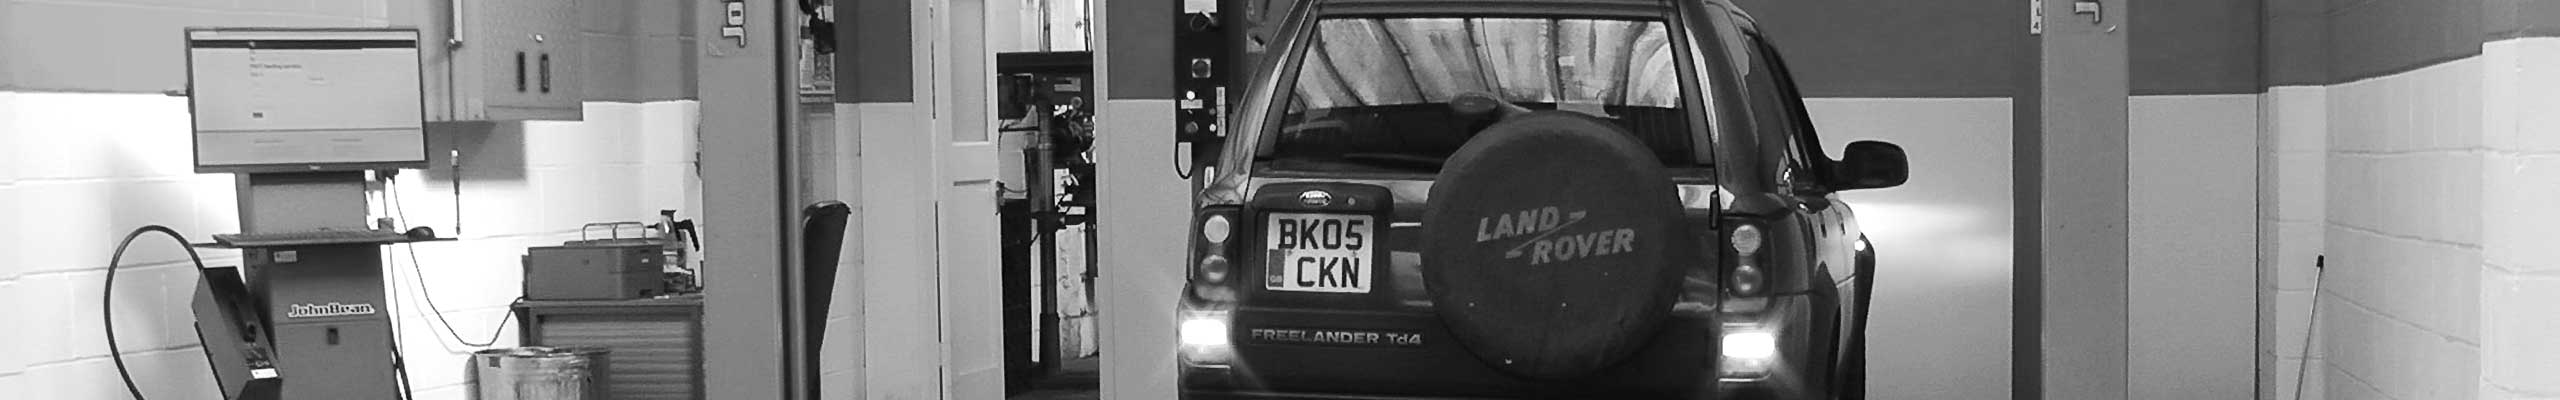 very classy black and white expert photo of excels mot testing bay with a land rover part way through testing